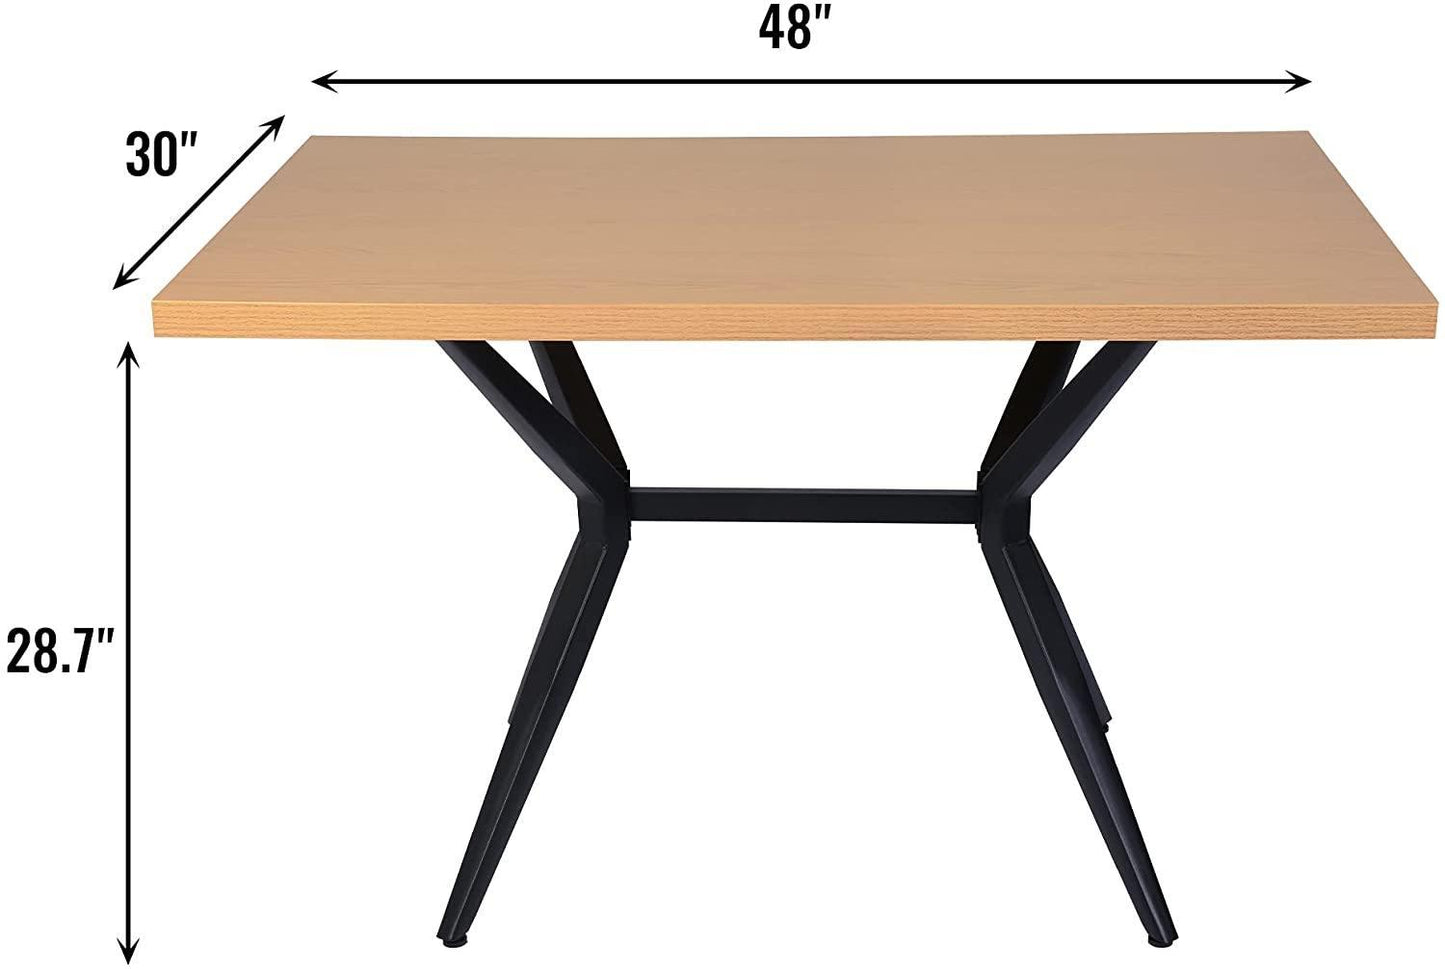 48" x 30" Mid-Century Dining Table with Metal Legs